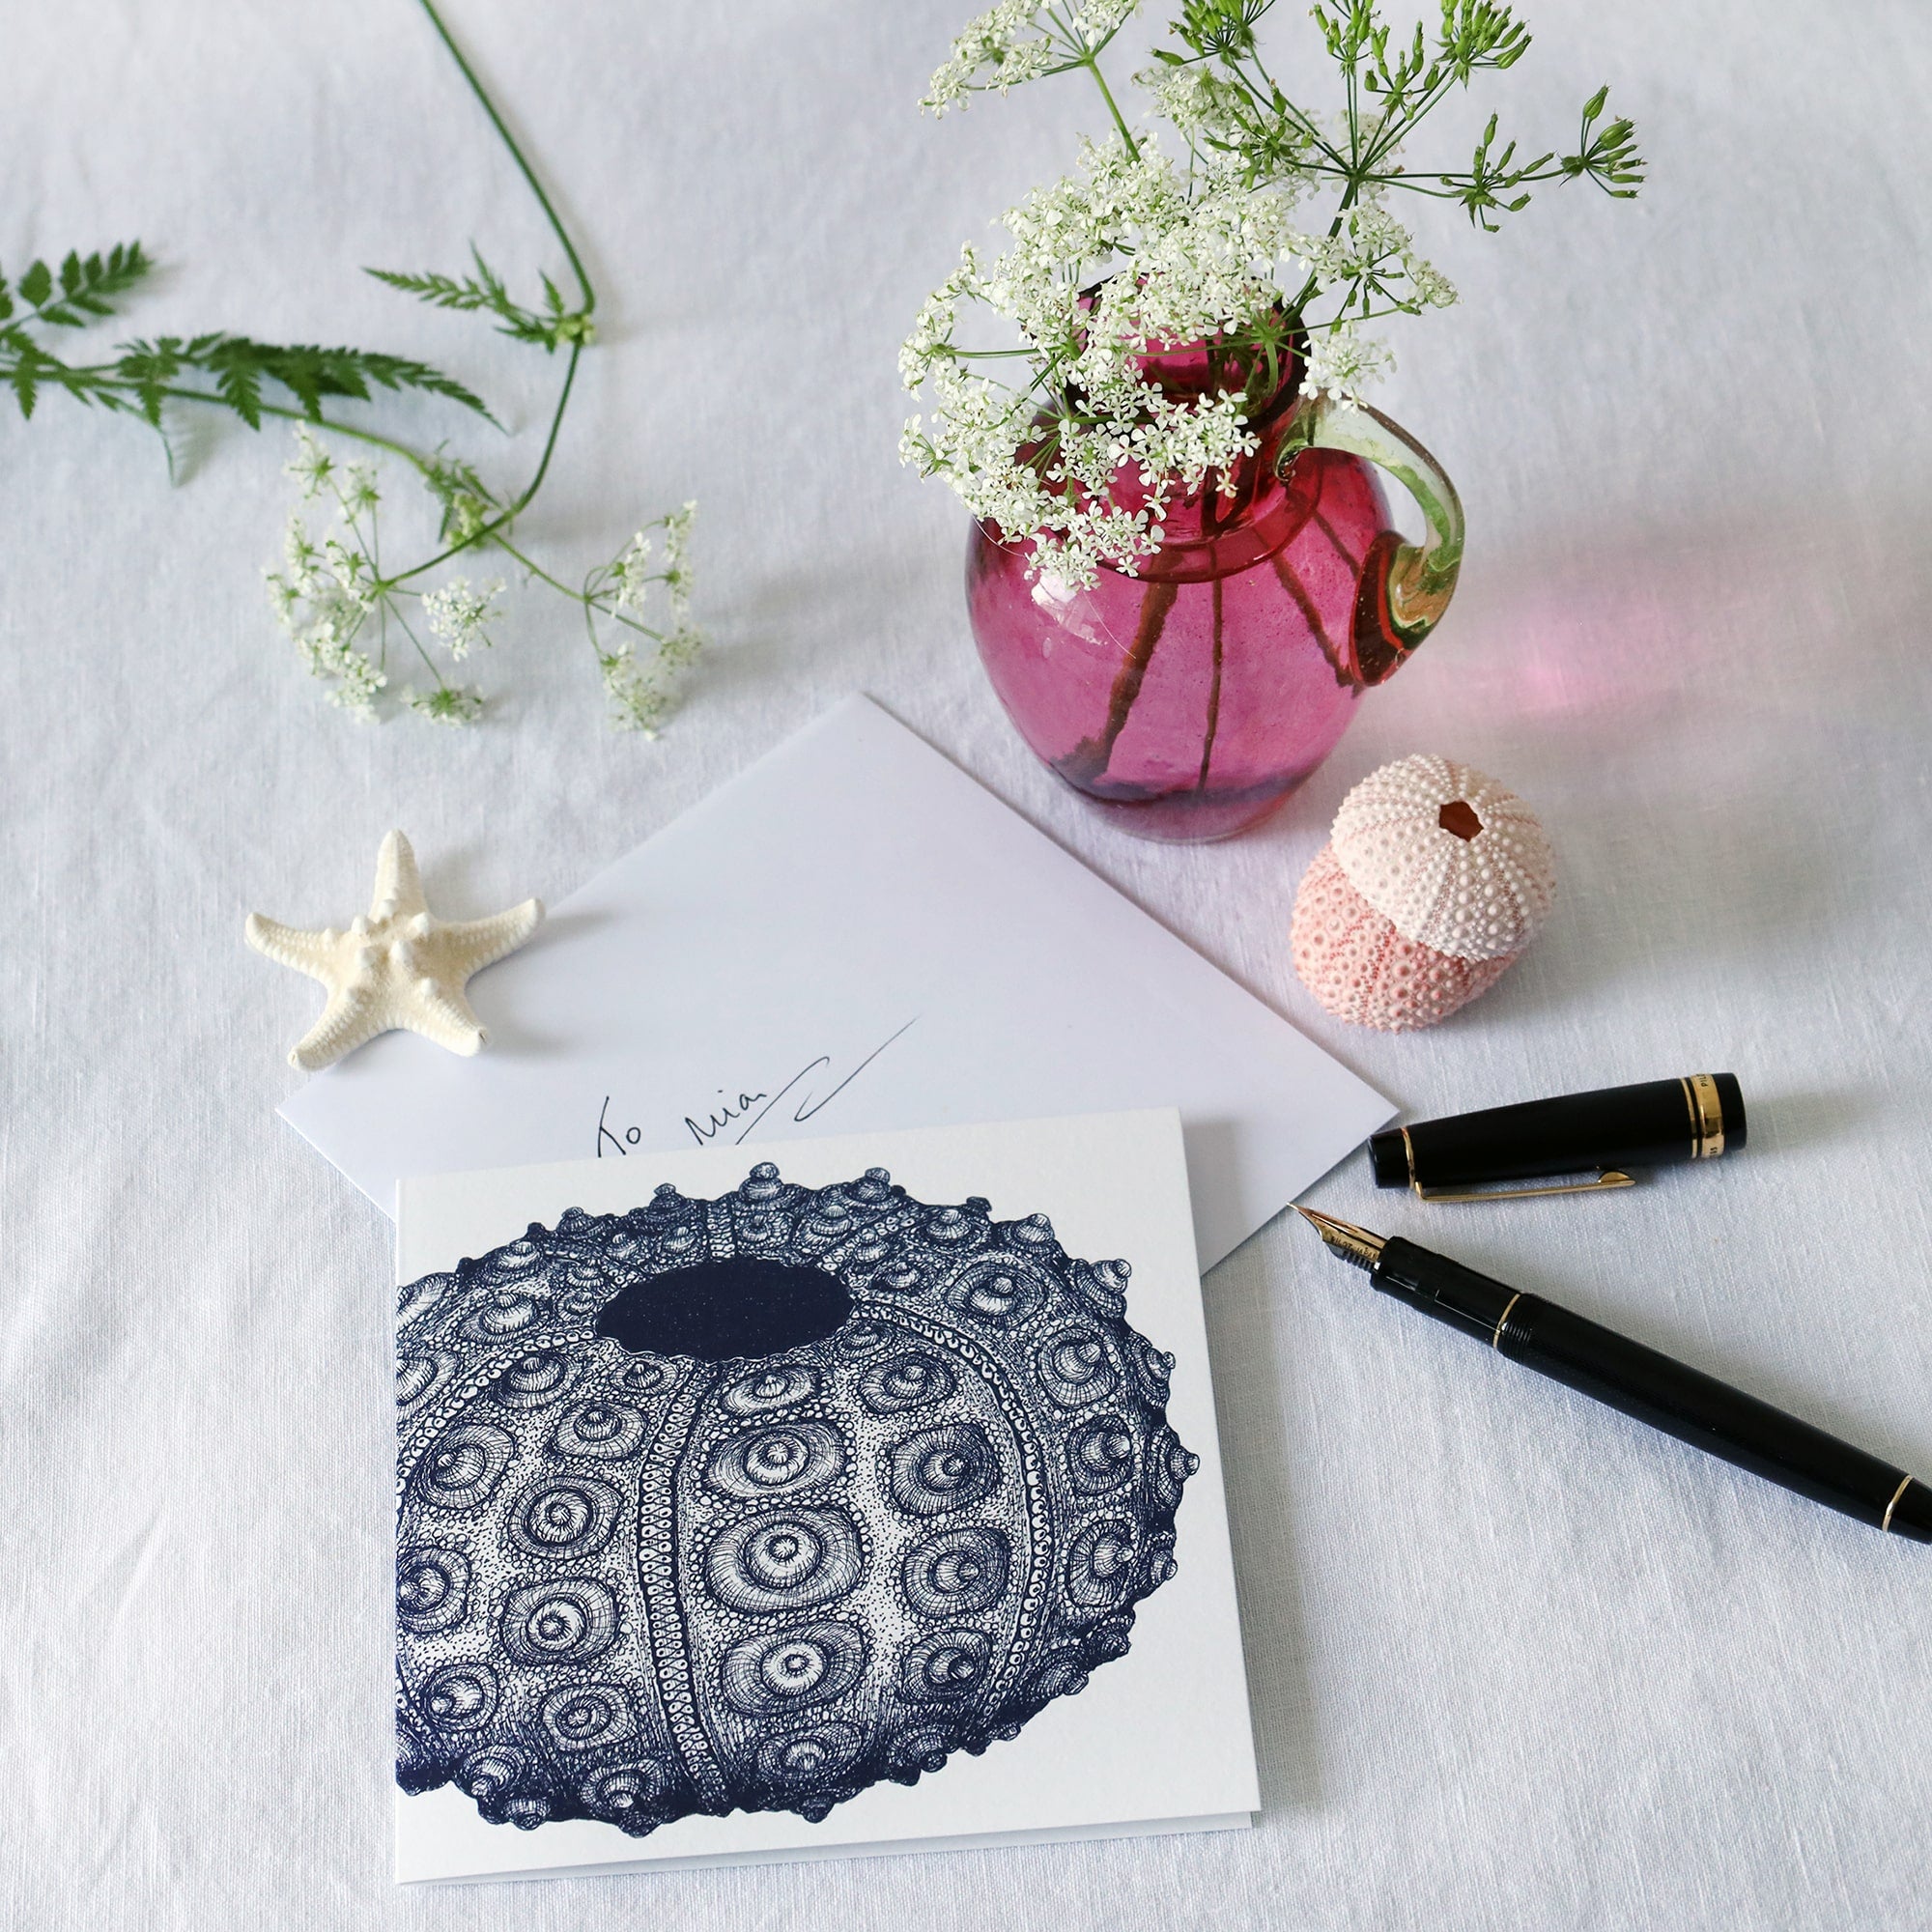 greeting card with nay illustrated sea urchin on white background lying on a white table cloth with a fountain pen, hand written envelope shells and a small cranberry glass jug with wild flowers in 